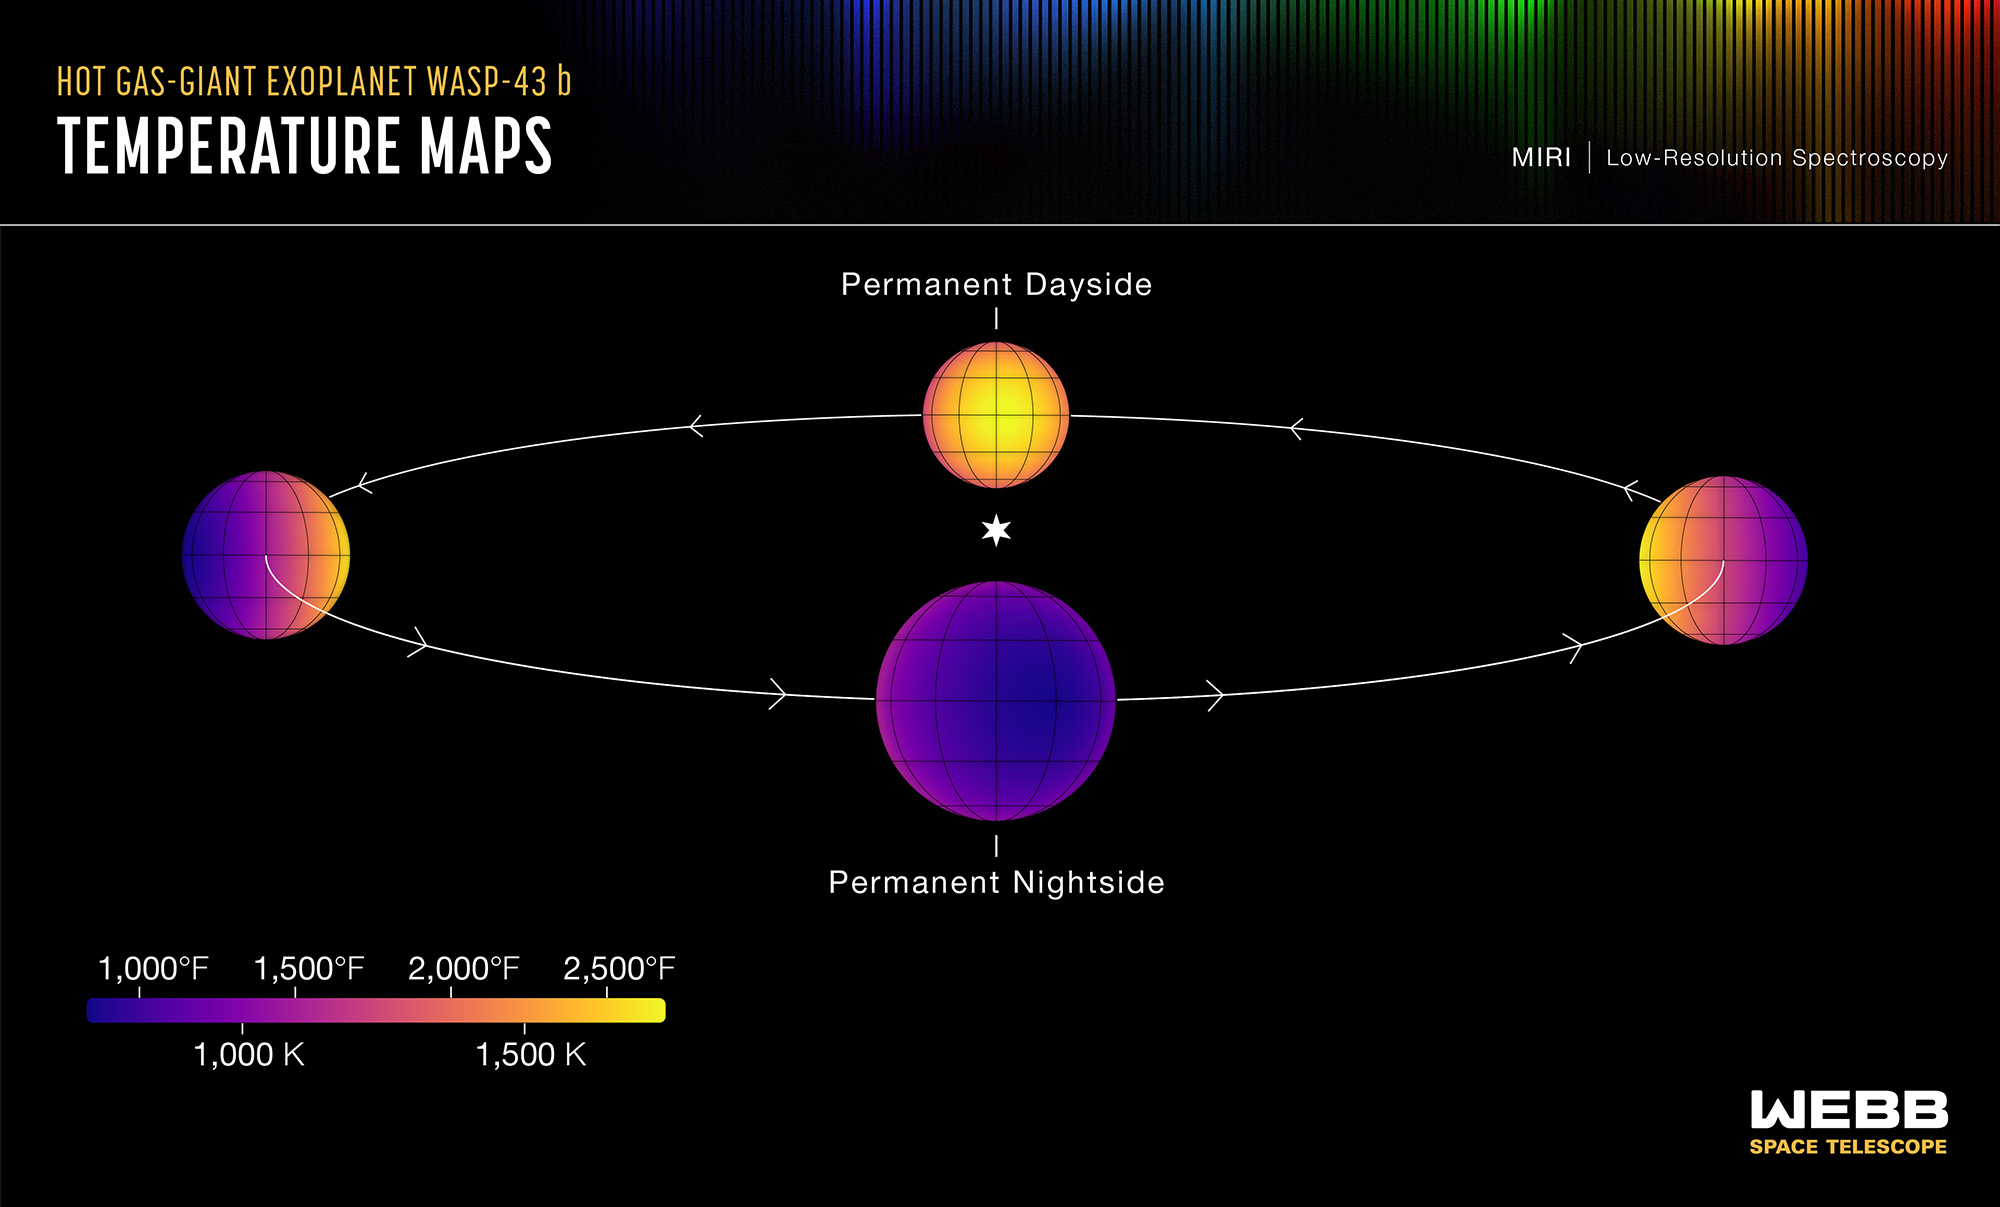 Graphic titled “Hot Gas-giant Exoplanet WASP-43 b: Temperature Maps; MIRI Low-Resolution Spectroscopy” showing purple to yellow temperature maps of planet’s telescope-facing hemisphere at 4 orbital positions. Gray line with arrows pointing counterclockwise forms orbital path around star. Temperature scale at lower left, labeled in °F and K, grades from purple at left to yellow at right: 1,000°F is purple; 1,500°F pink; 2,000°F orange; 2,500°F yellow. 1,000 K dark pink. 1,500 K orange-yellow. Planet behind star, labeled “Permanent Dayside”: Hemisphere is yellow in center, grading to orange at edges. Planet left of star: Color grades from yellow at right edge facing star to purple at left edge facing away. Planet in front of star, labeled “Permanent Nightside” is purple slightly right of center, grading to dark pink at edges. Planet right of star: Color grades from yellow at left edge facing star to purple at right edge facing away.